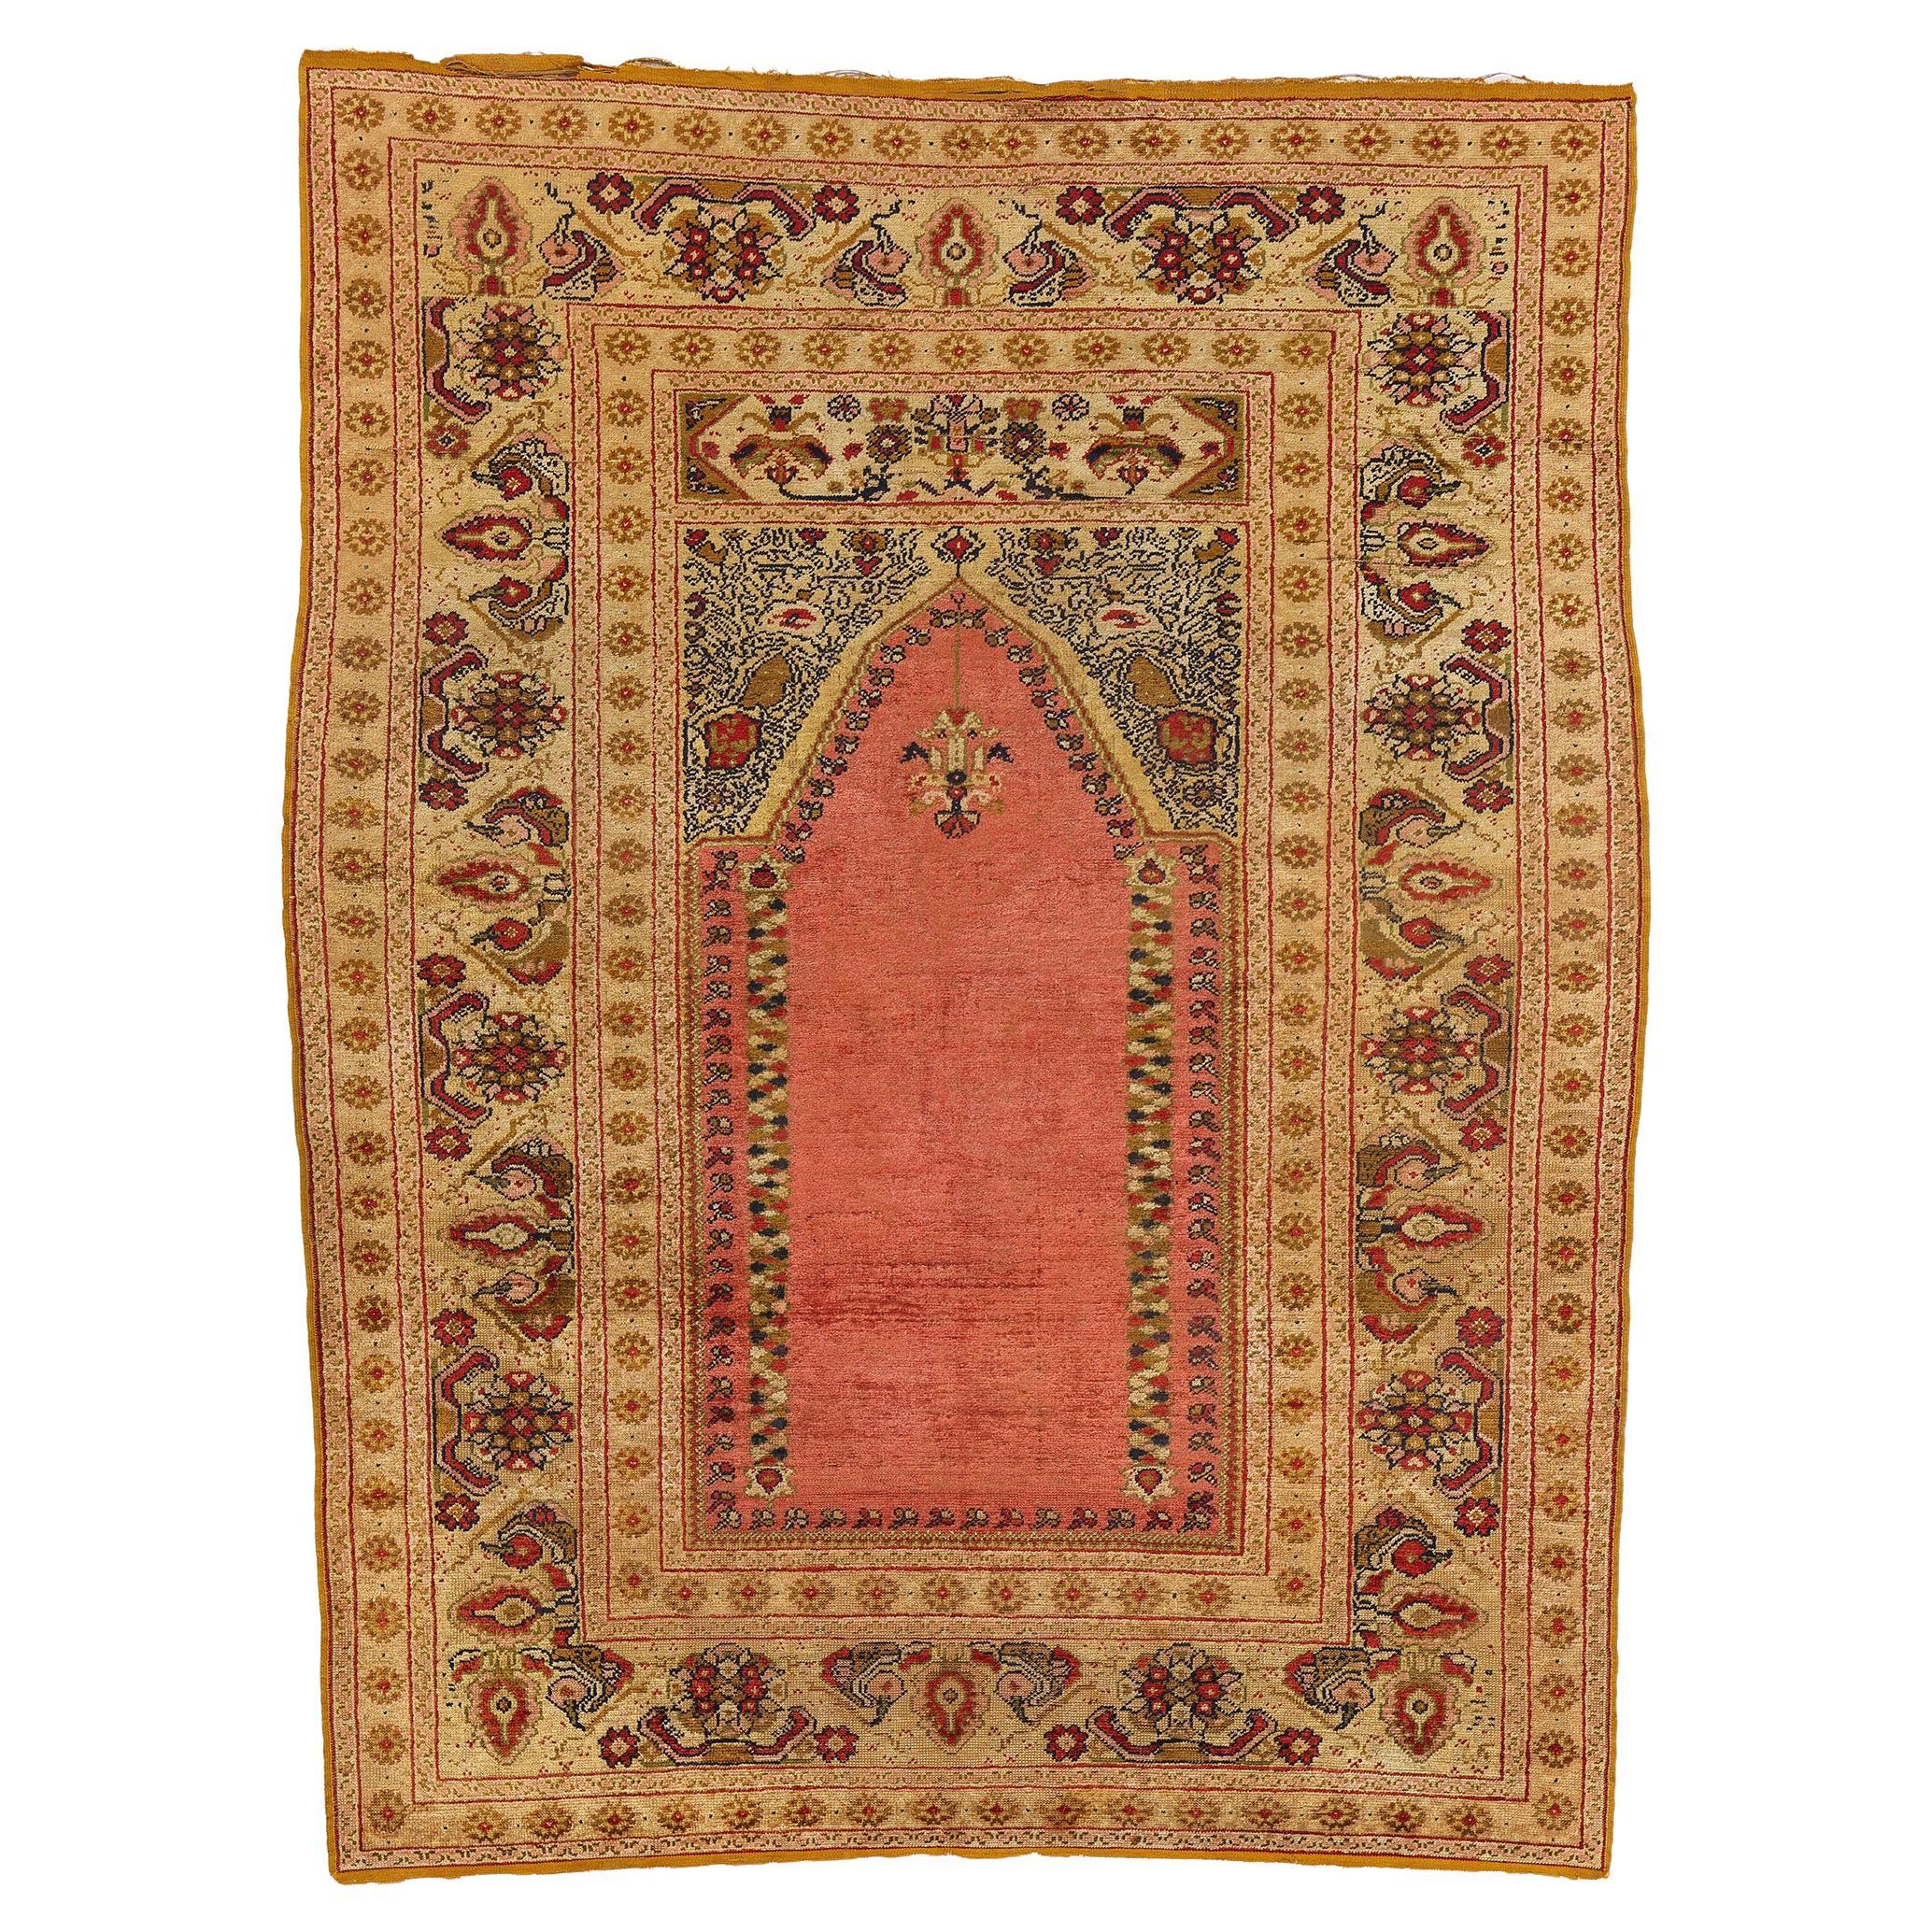 How can I spot a real prayer rug?